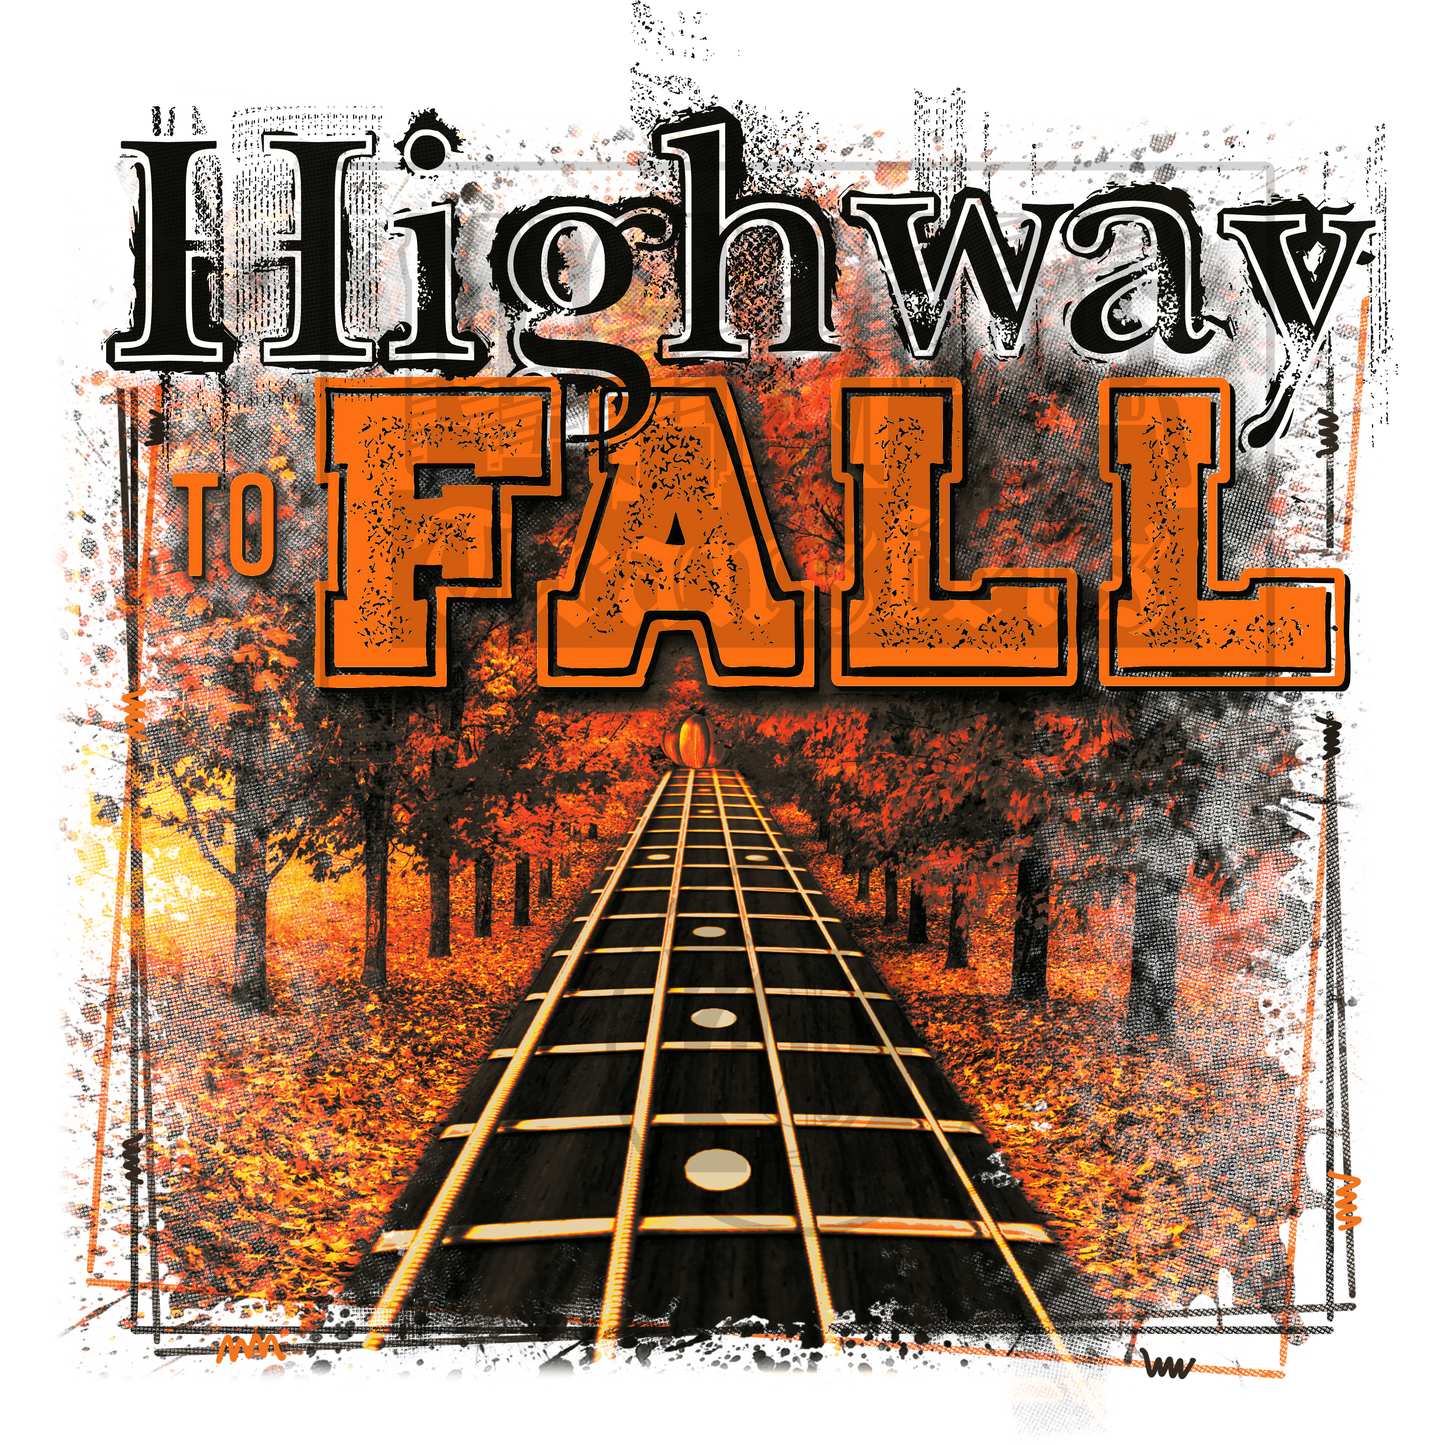 Highway to fall stock transfer.